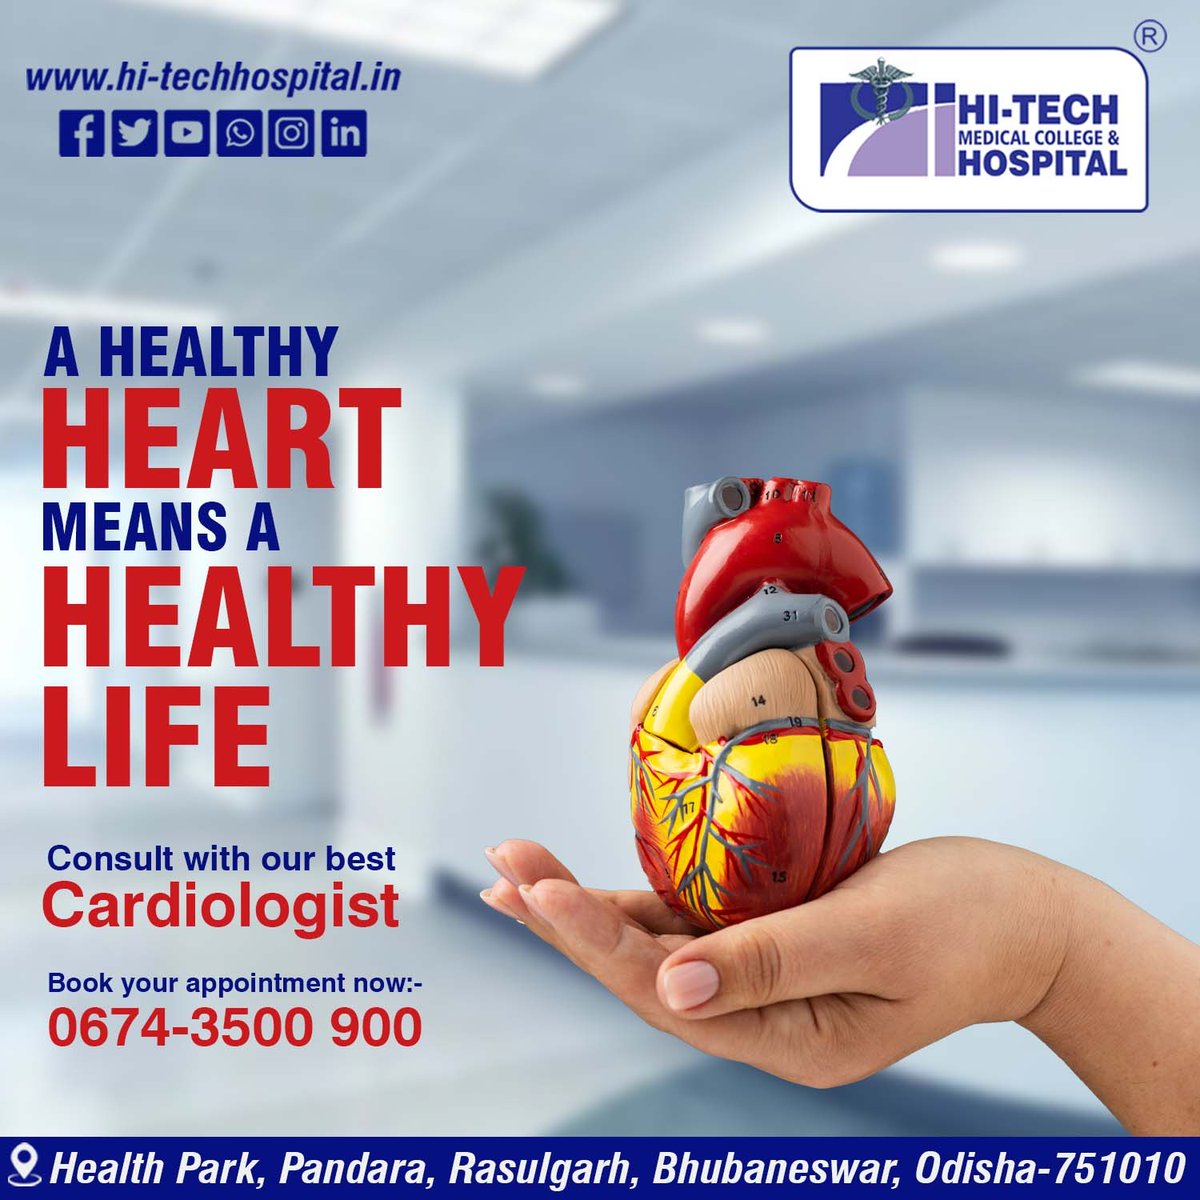 From regular check-ups to advanced treatments, our hospital is dedicated to safeguarding your health and well-being.

Call 𝟎𝟔𝟕𝟒-𝟑𝟓𝟎𝟎𝟗𝟎𝟎 to schedule a consultation.
#healthyheart #ExpertCare #hitechhospital #hearthealth #treatment  #stayhealthyandfit #hospital